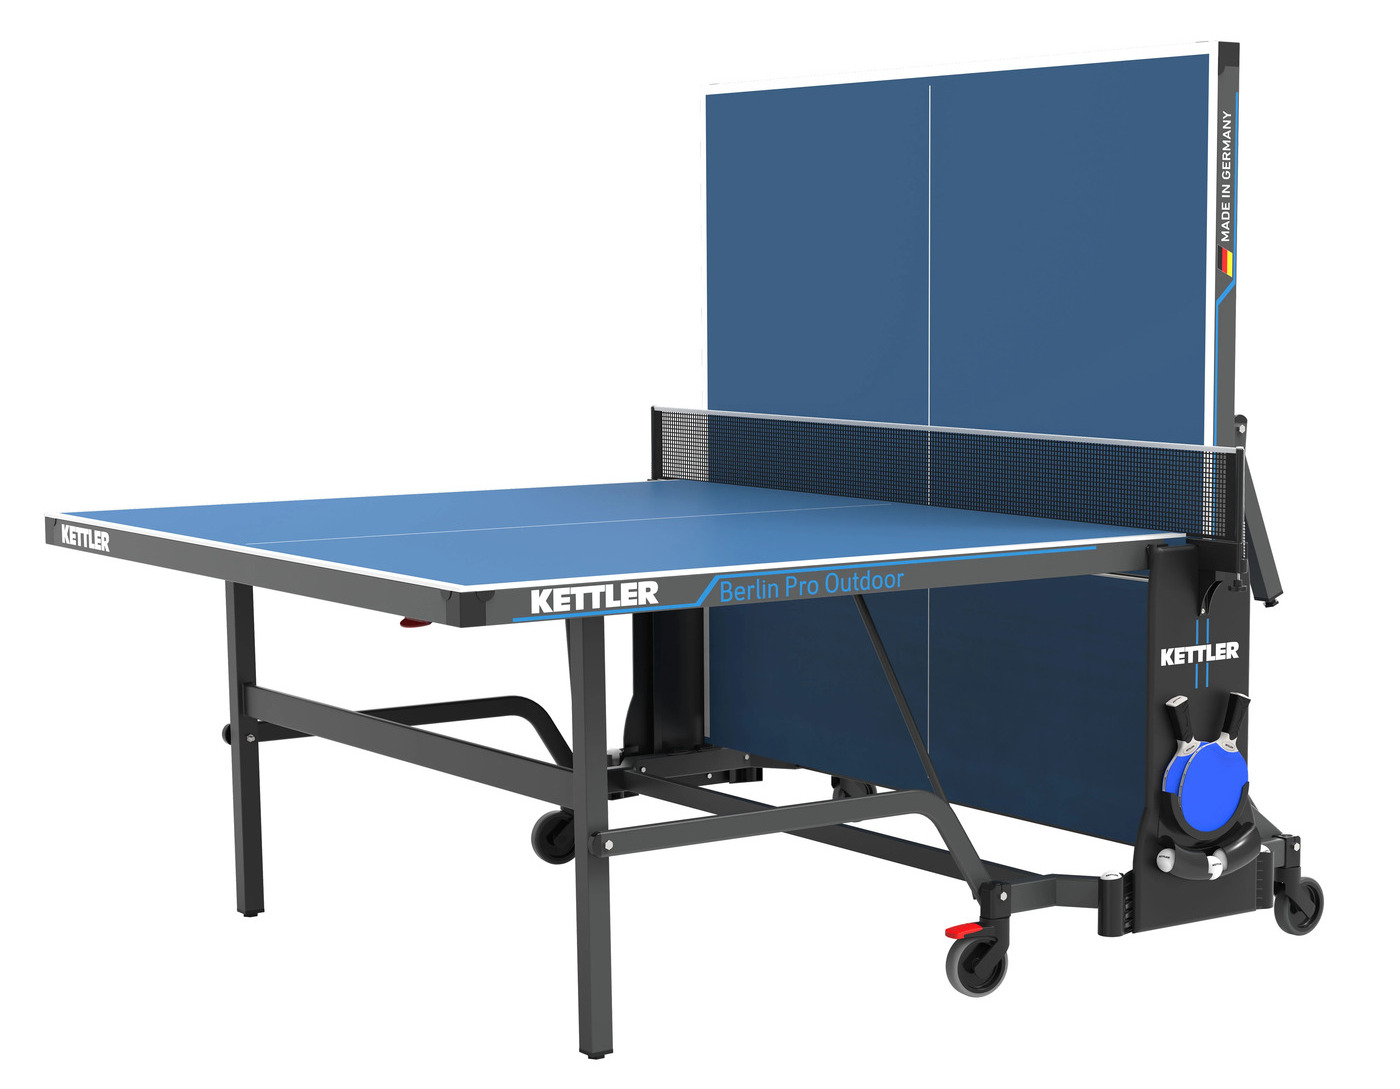 How To Unfold A Kettler Ping Pong Table